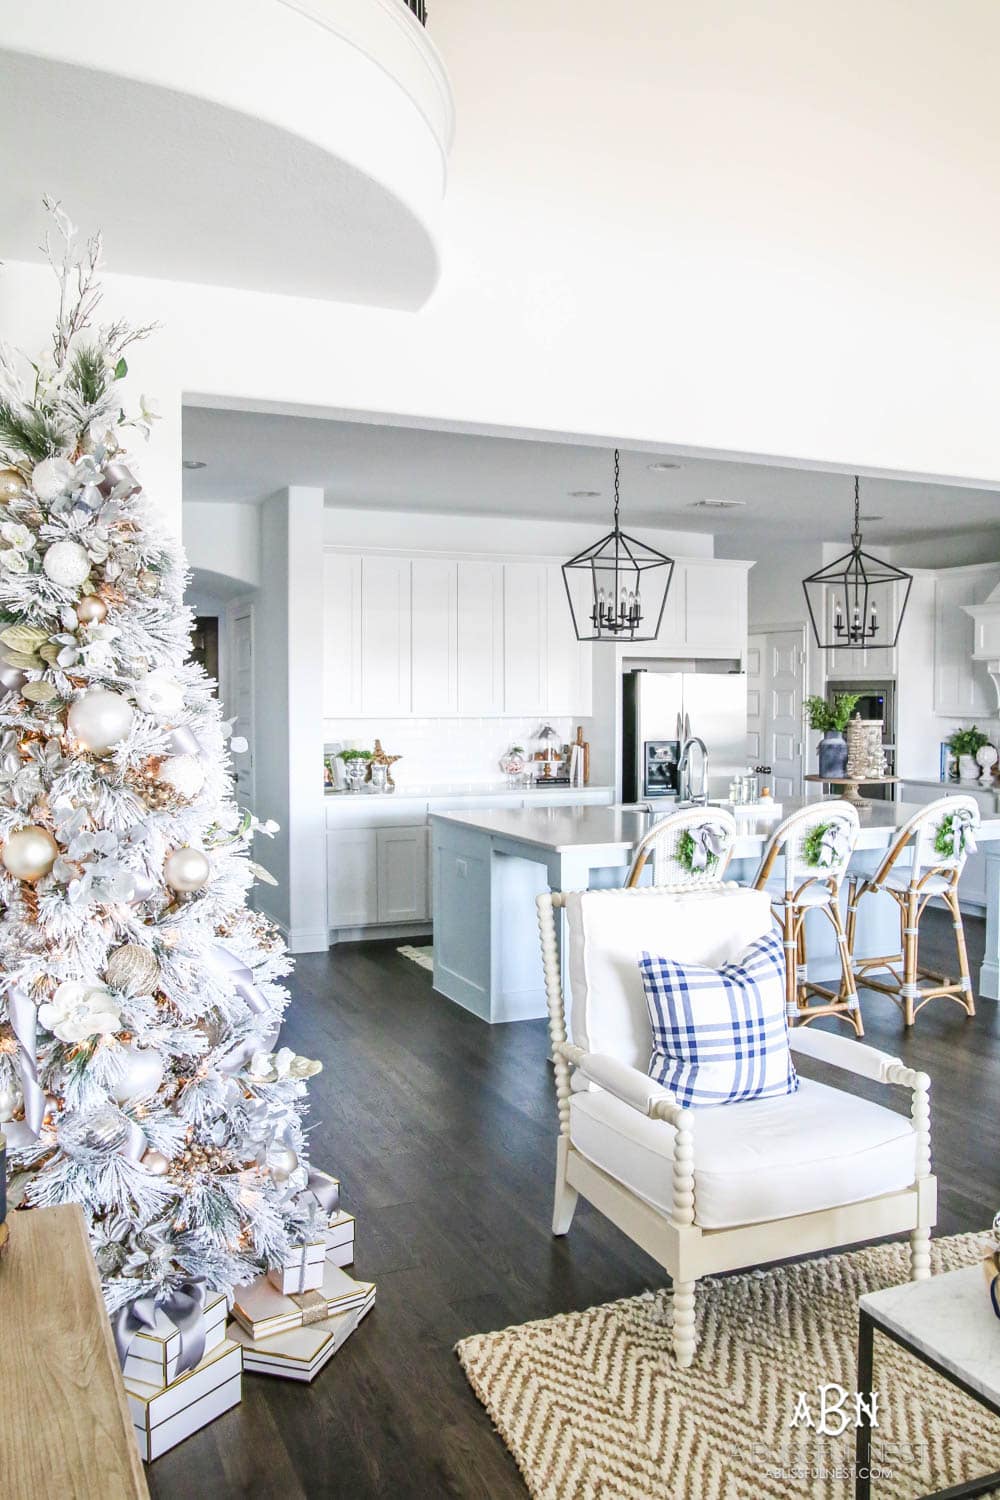 Blue and silver Christmas kitchen décor. All white kitchen with subtle holiday décor for a fresh coastal Christmas look. Mini wreaths on the backs of the barstools, beautiful bay leaf above the range. #christmaskitchen #christmashometour #holidayhometour #kitchenideas